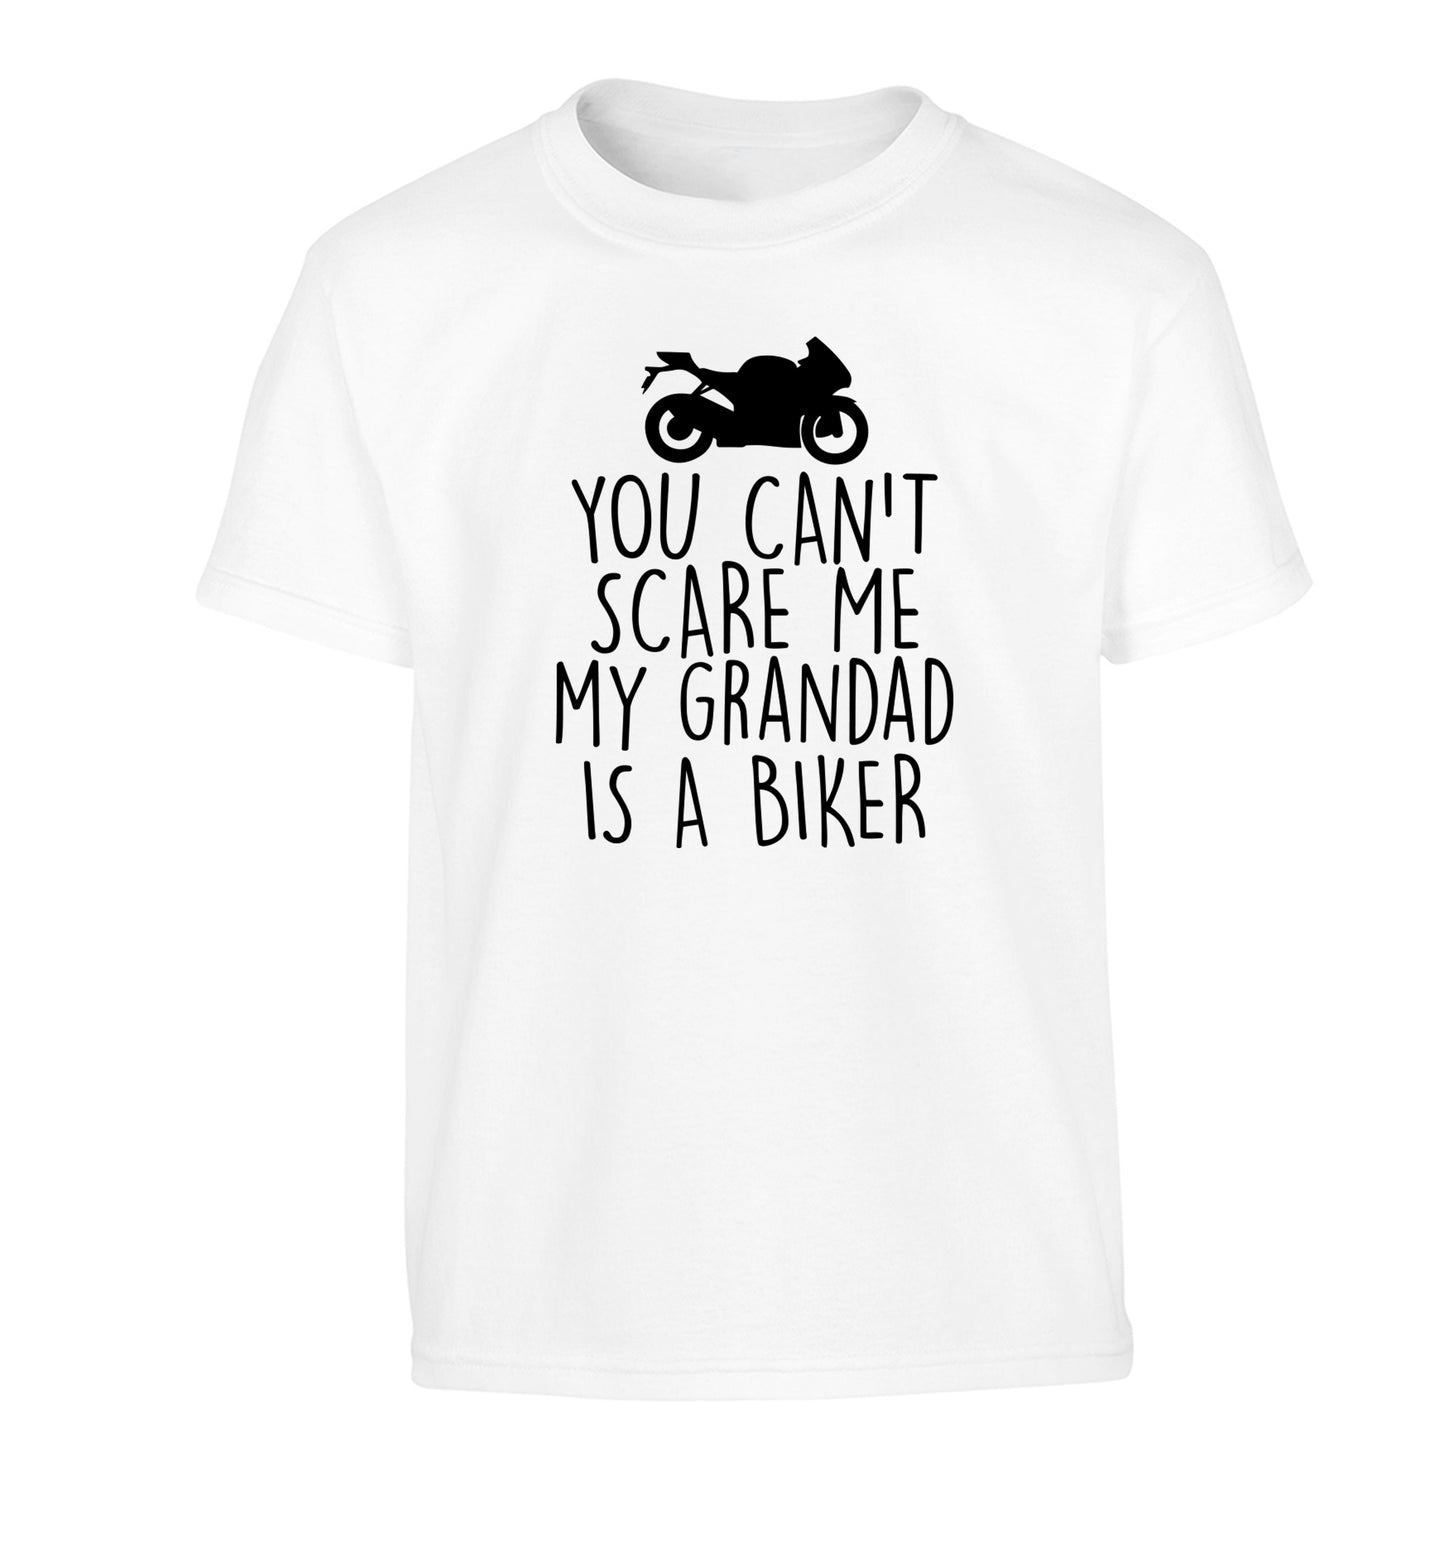 You can't scare me my grandad is a biker Children's white Tshirt 12-13 Years